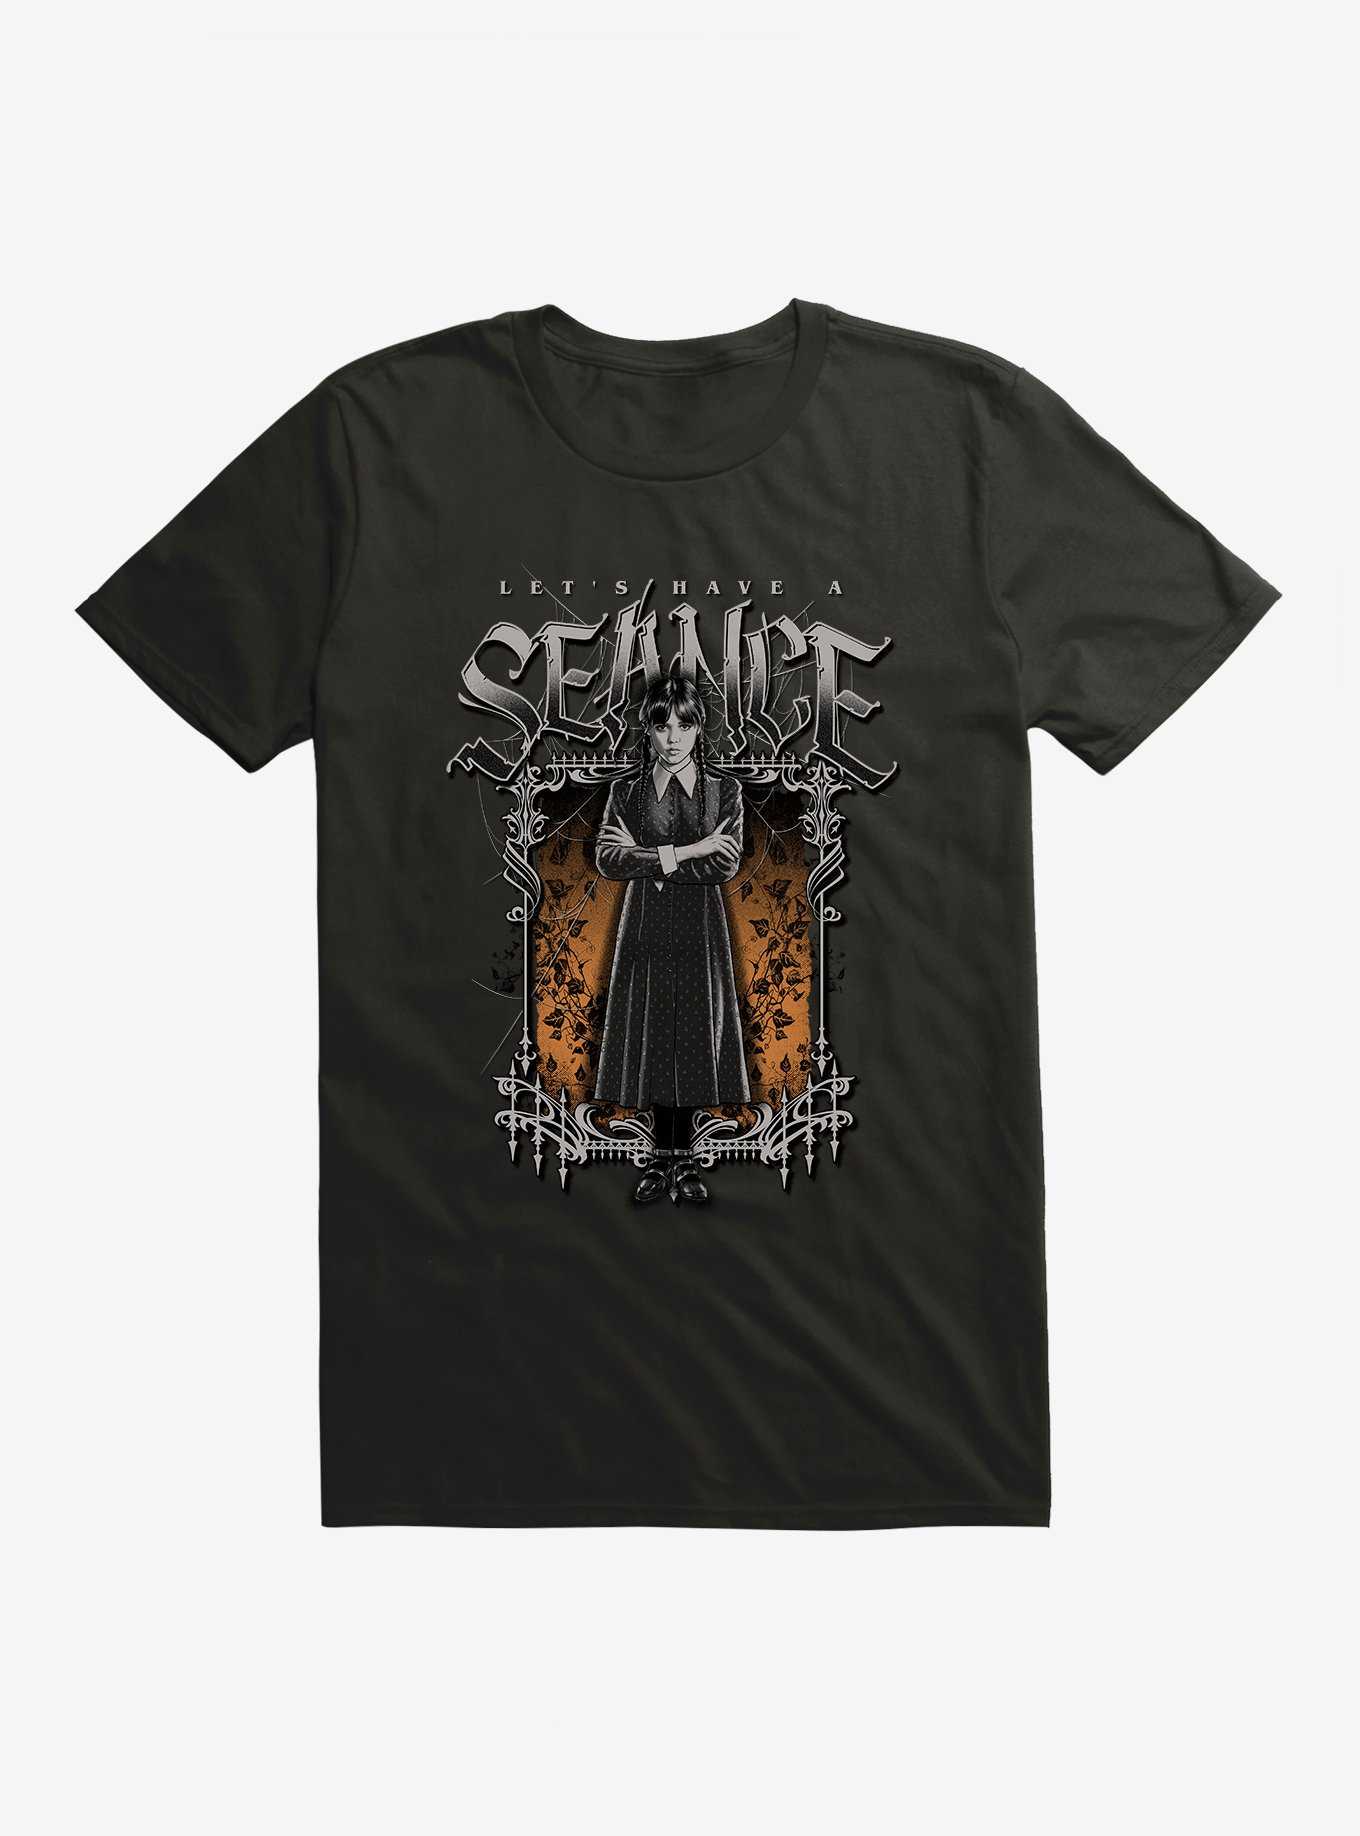 Wednesday Let's Have A Seance T-Shirt, , hi-res